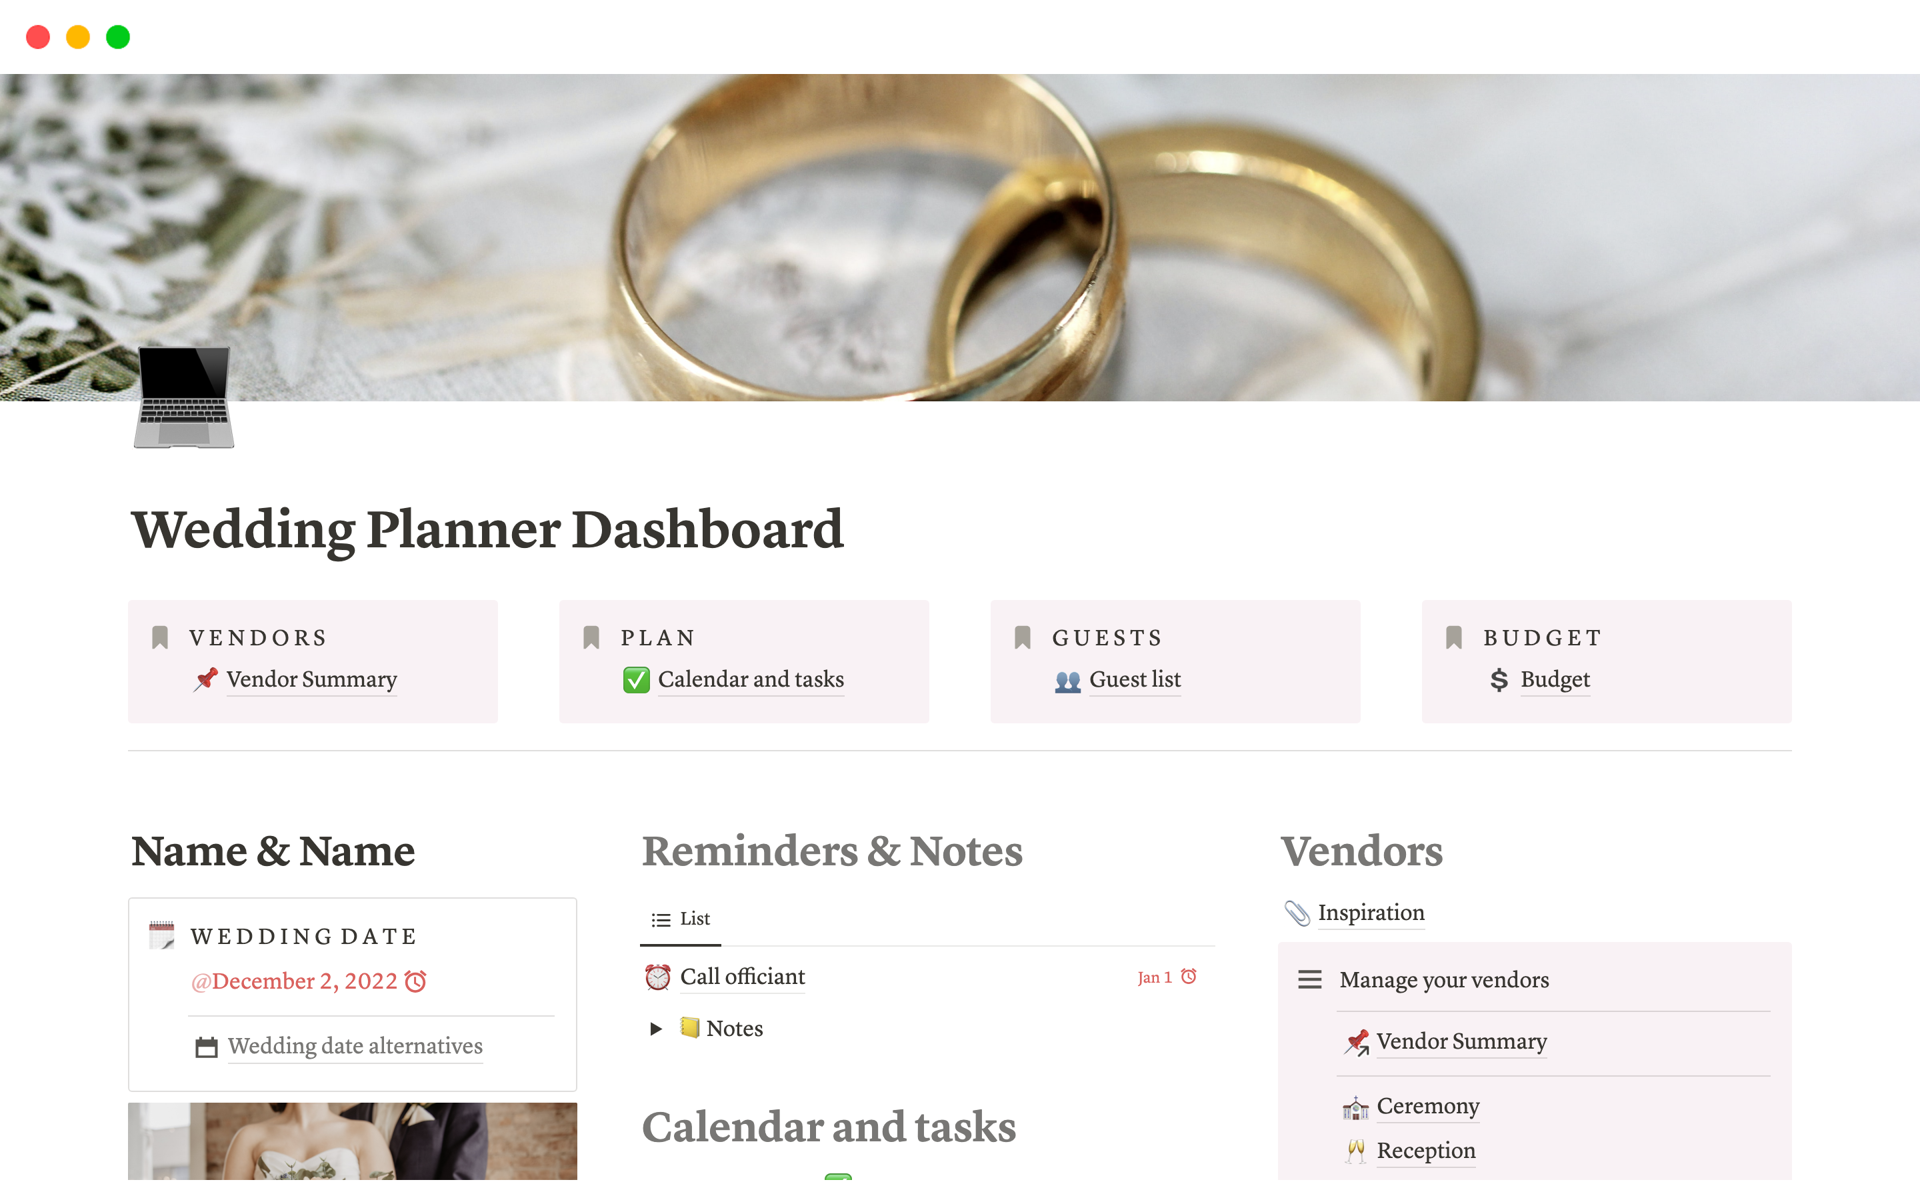 All-in-one wedding organizer and planner in a visual and intuitive Notion template. 